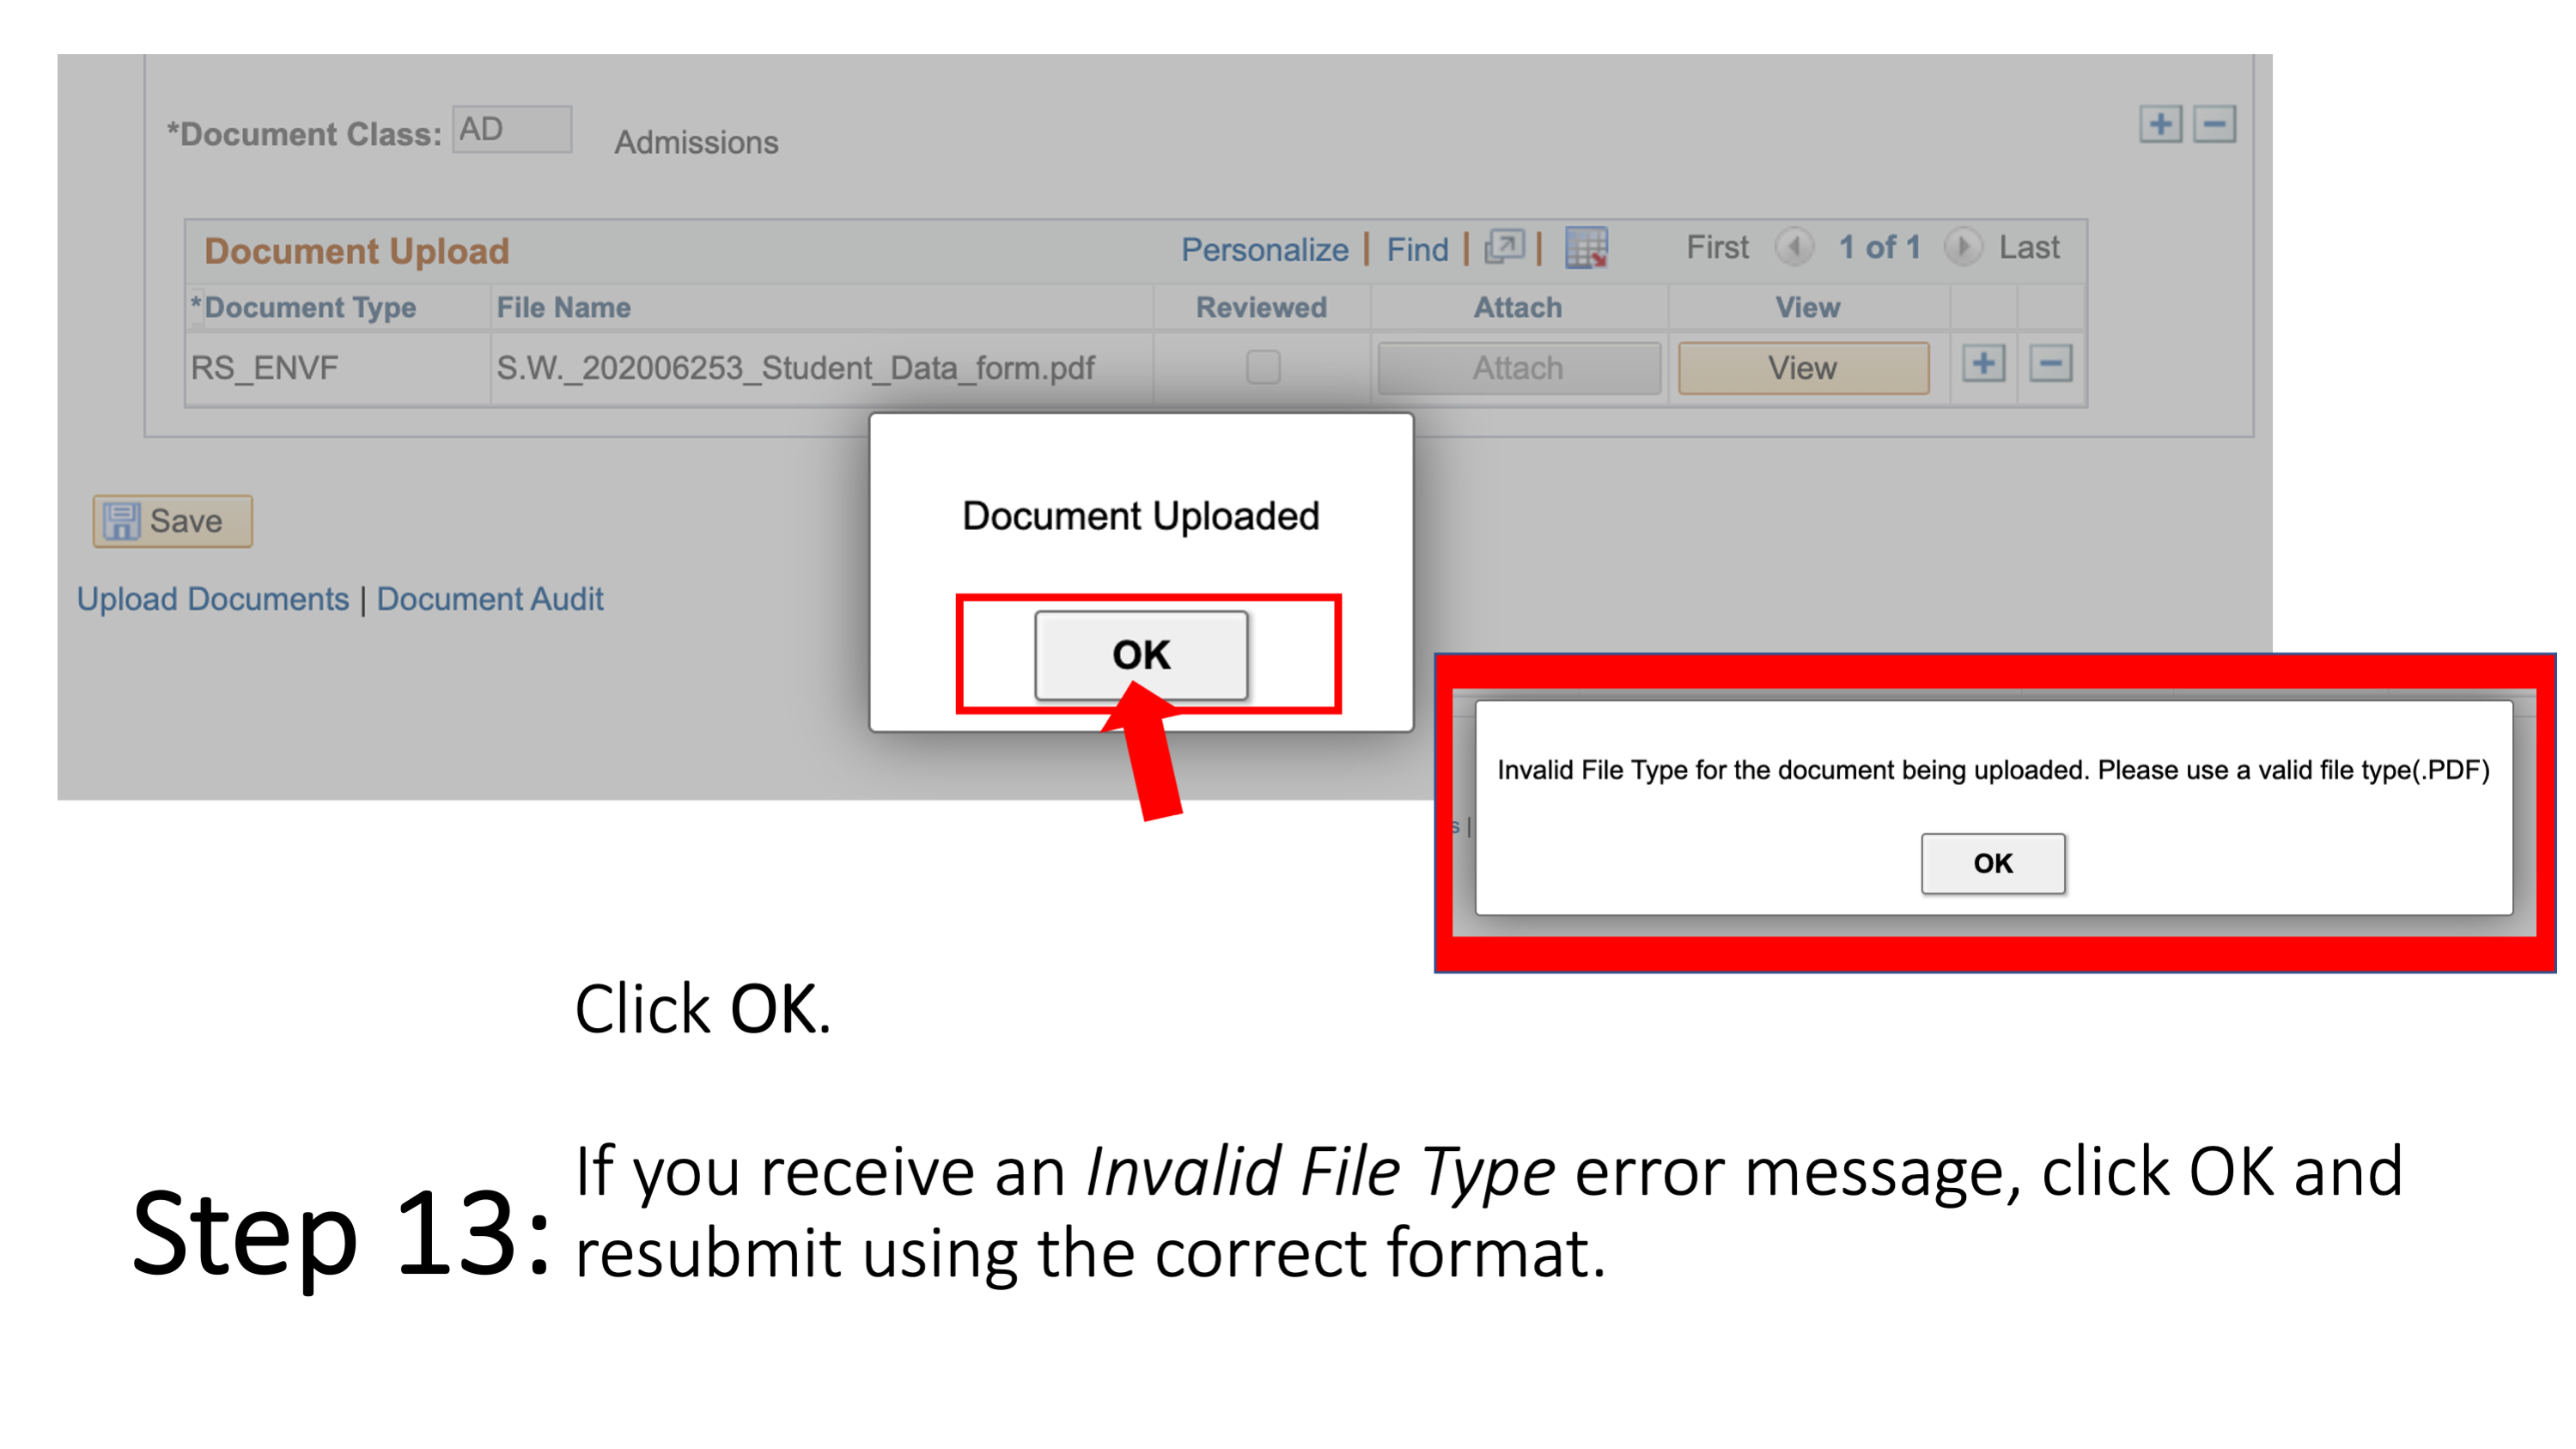 Slide 14 - Step 13: Click OK. If you receive an Invalid File Type error message, click OK and resubmit using the correct format. 